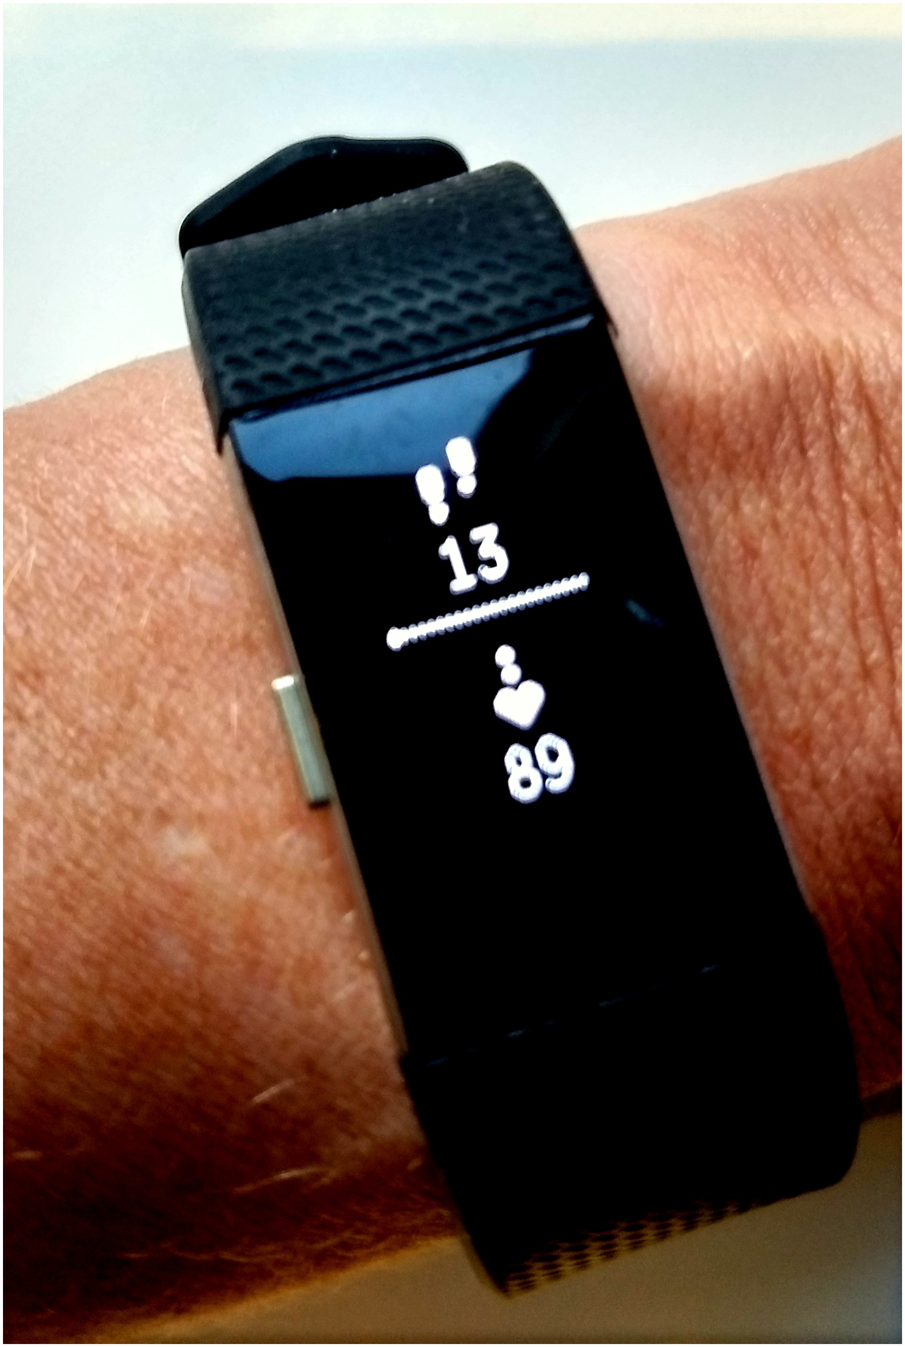 Is Fitbit Charge 2 a feasible instrument to monitor daily physical activity and handbike training in with spinal cord injury? A pilot study | Spinal Cord Series and Cases